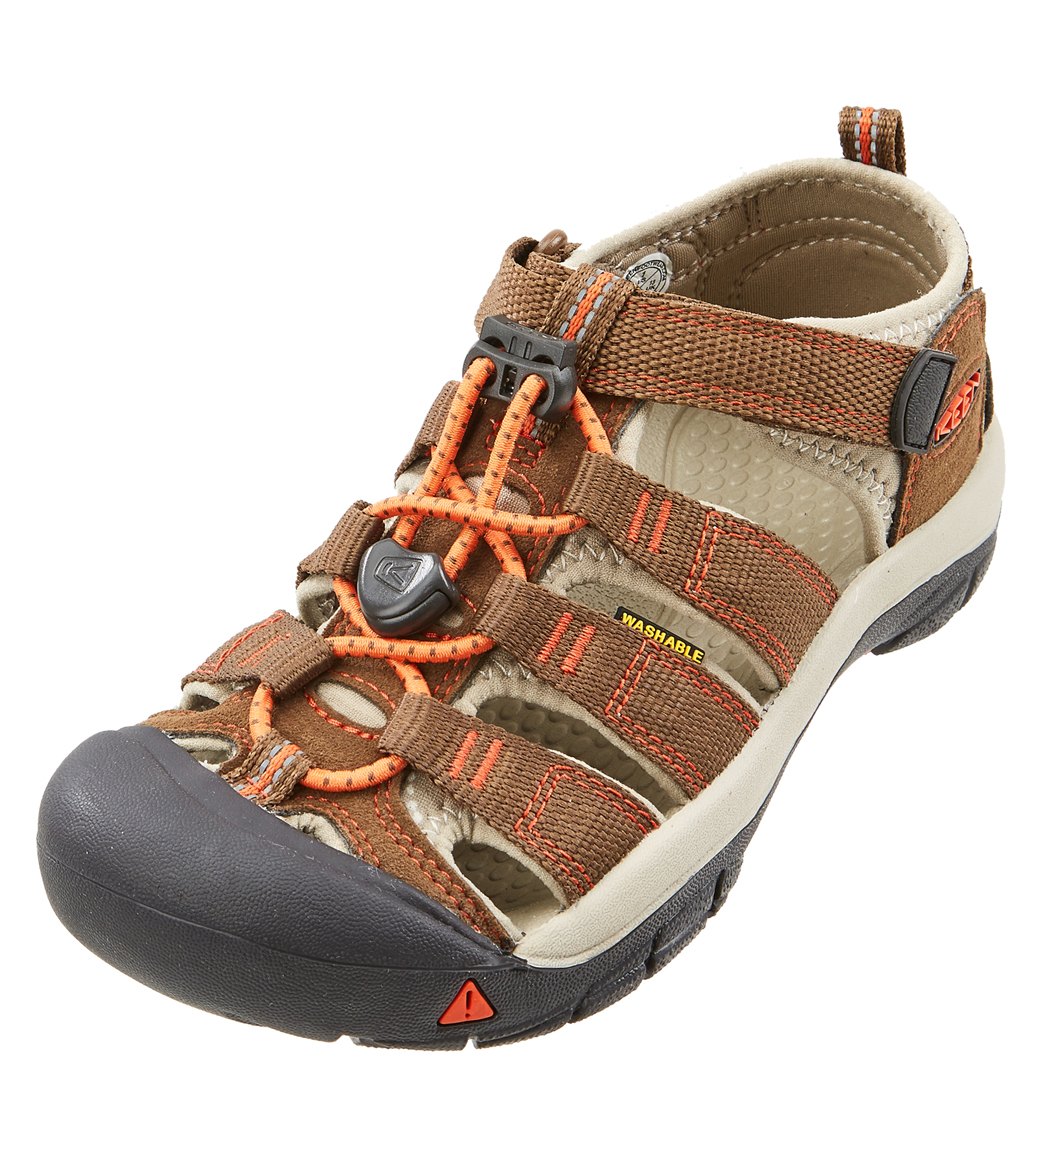 Keen Youth's Newport H2 Water Shoes at SwimOutlet.com - Free Shipping